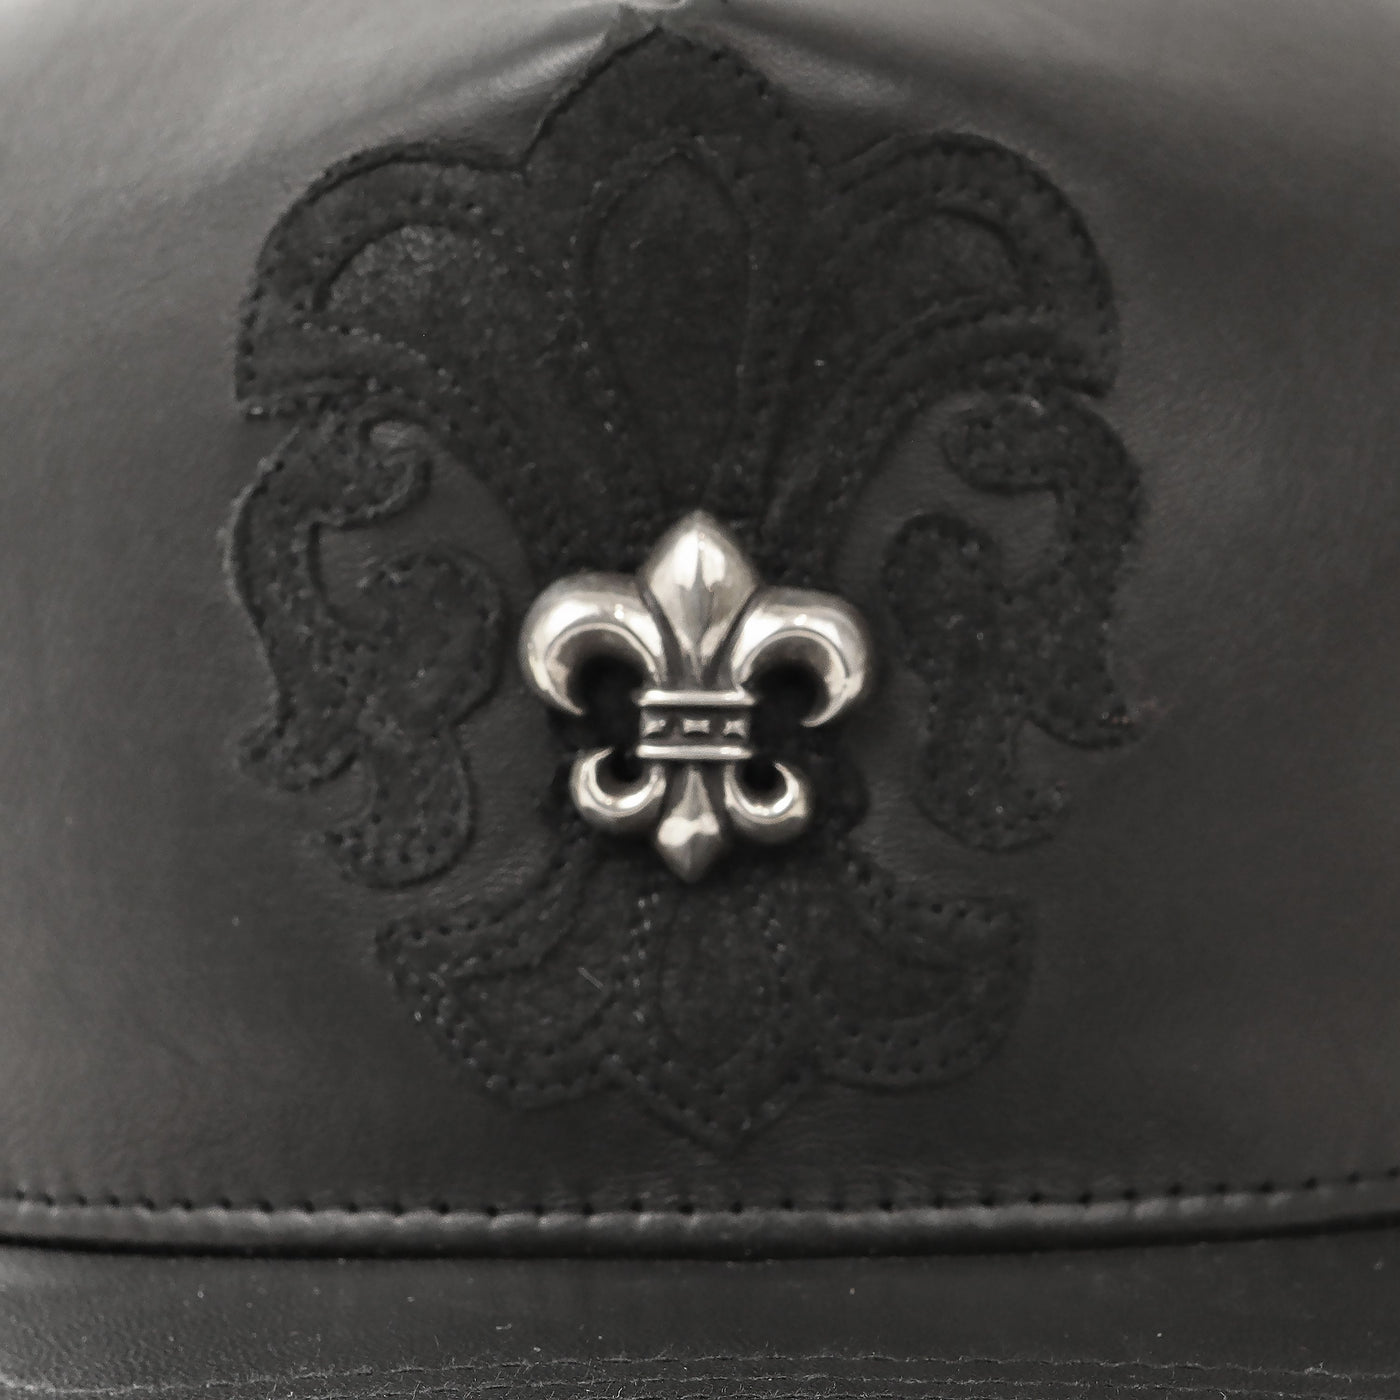 Chrome Hearts Black Leather w/ Silver Cross Hat